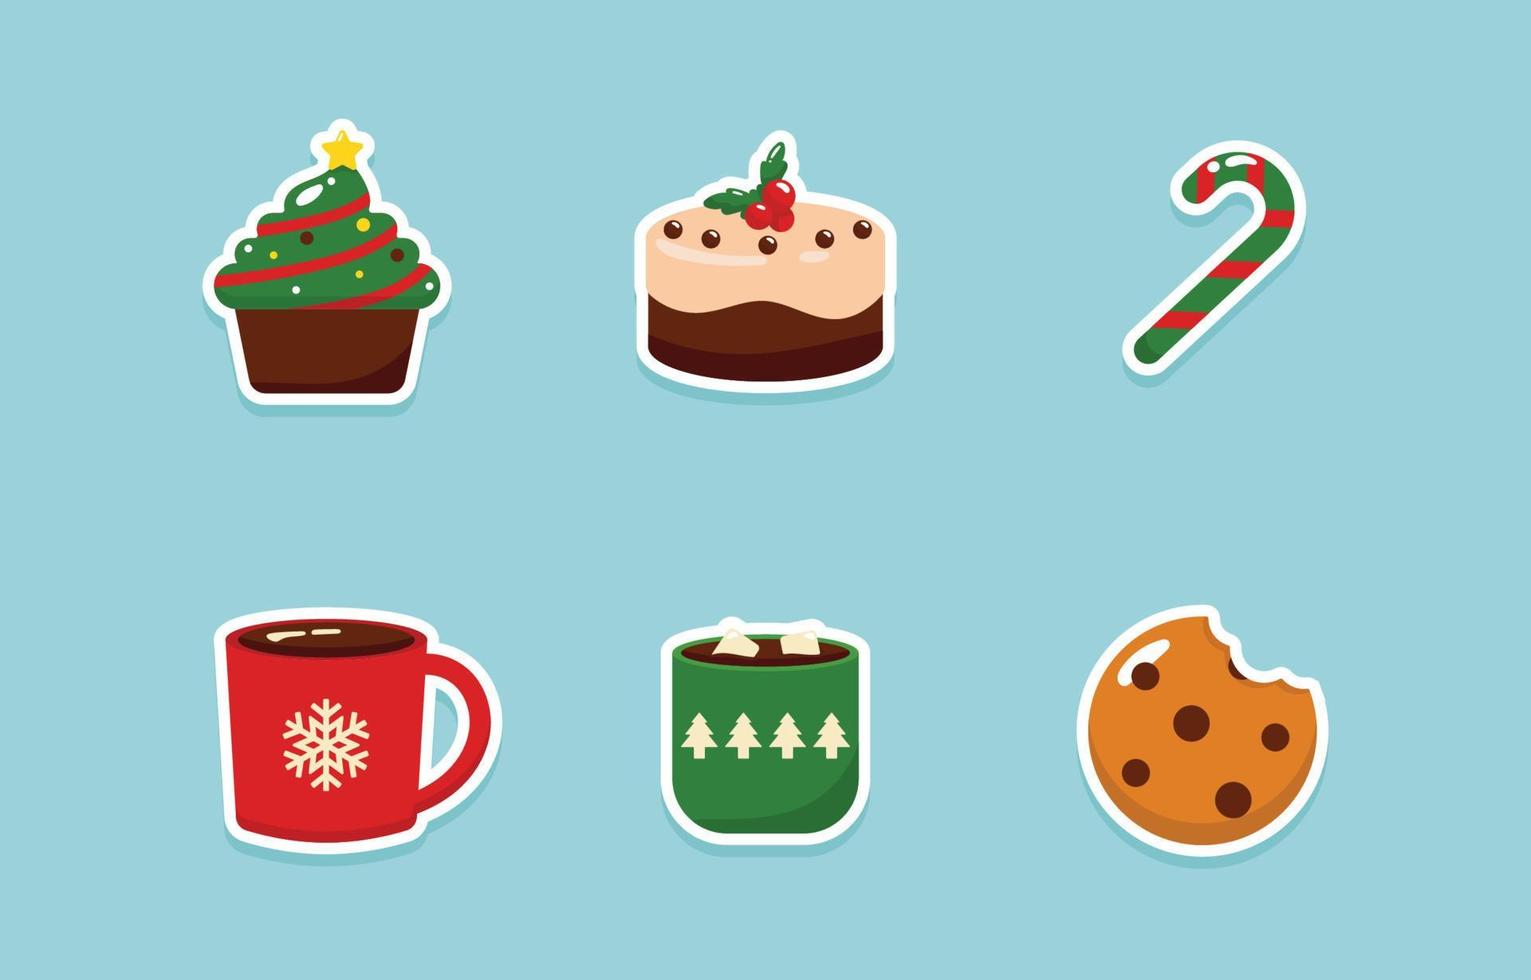 Christmas Sweets Sticker vector